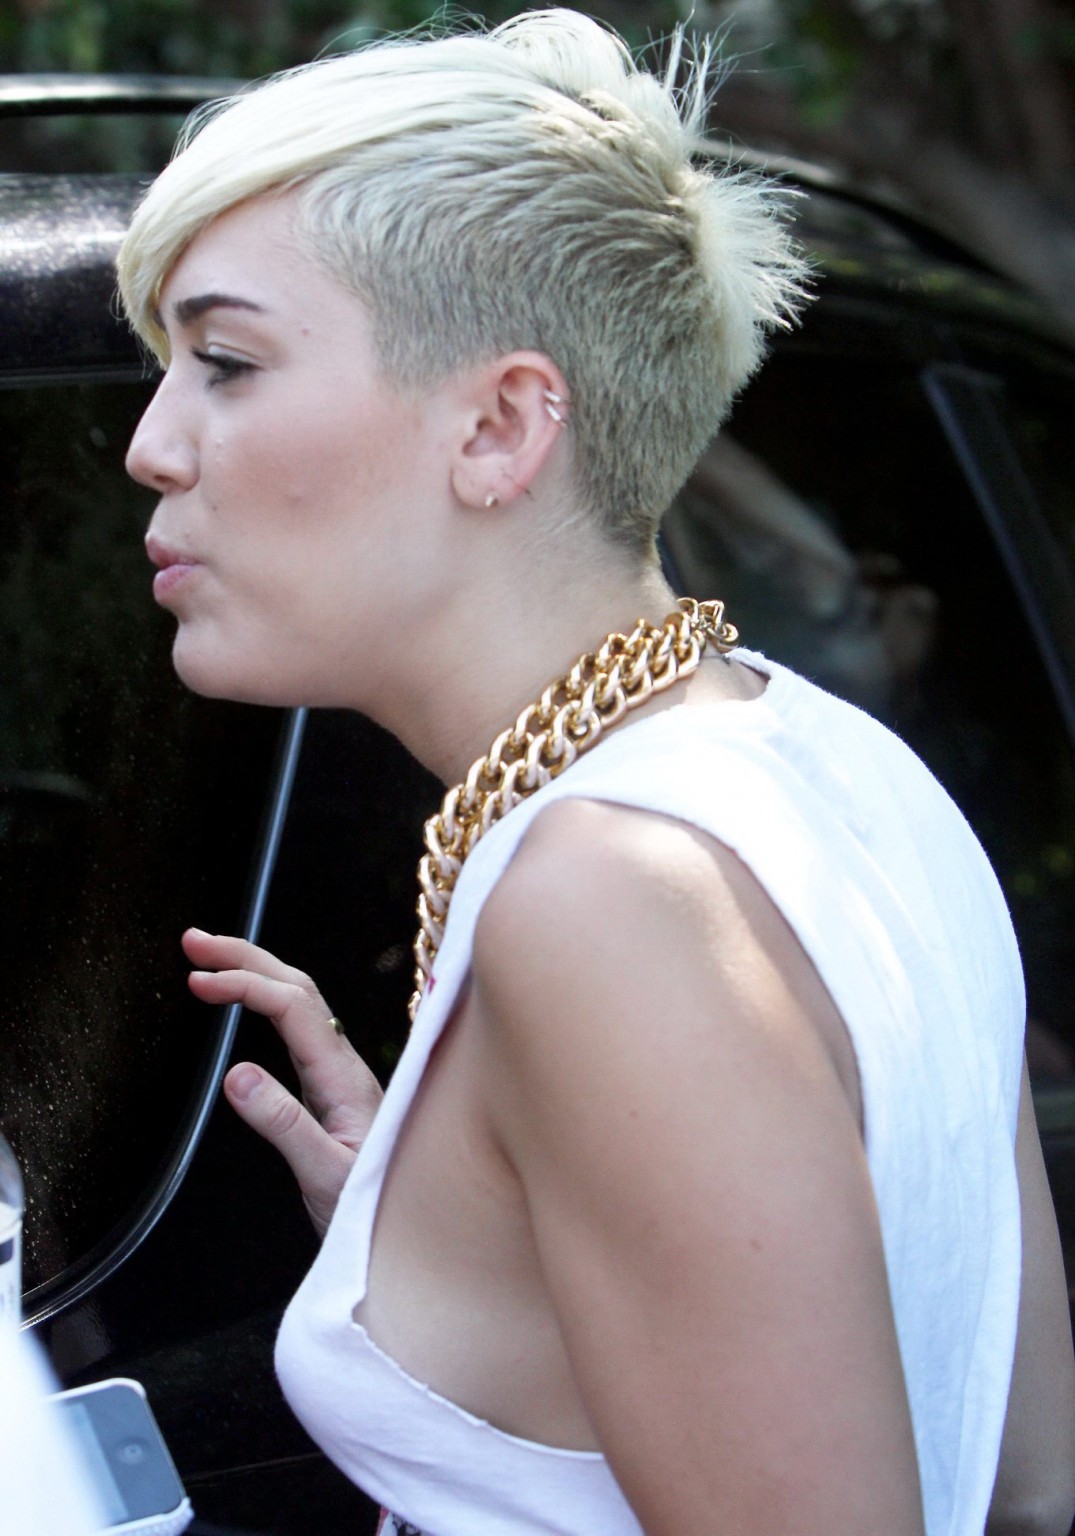 Miley Cyrus braless showing side boob outside the 'Whole Foods' in LA #75252949